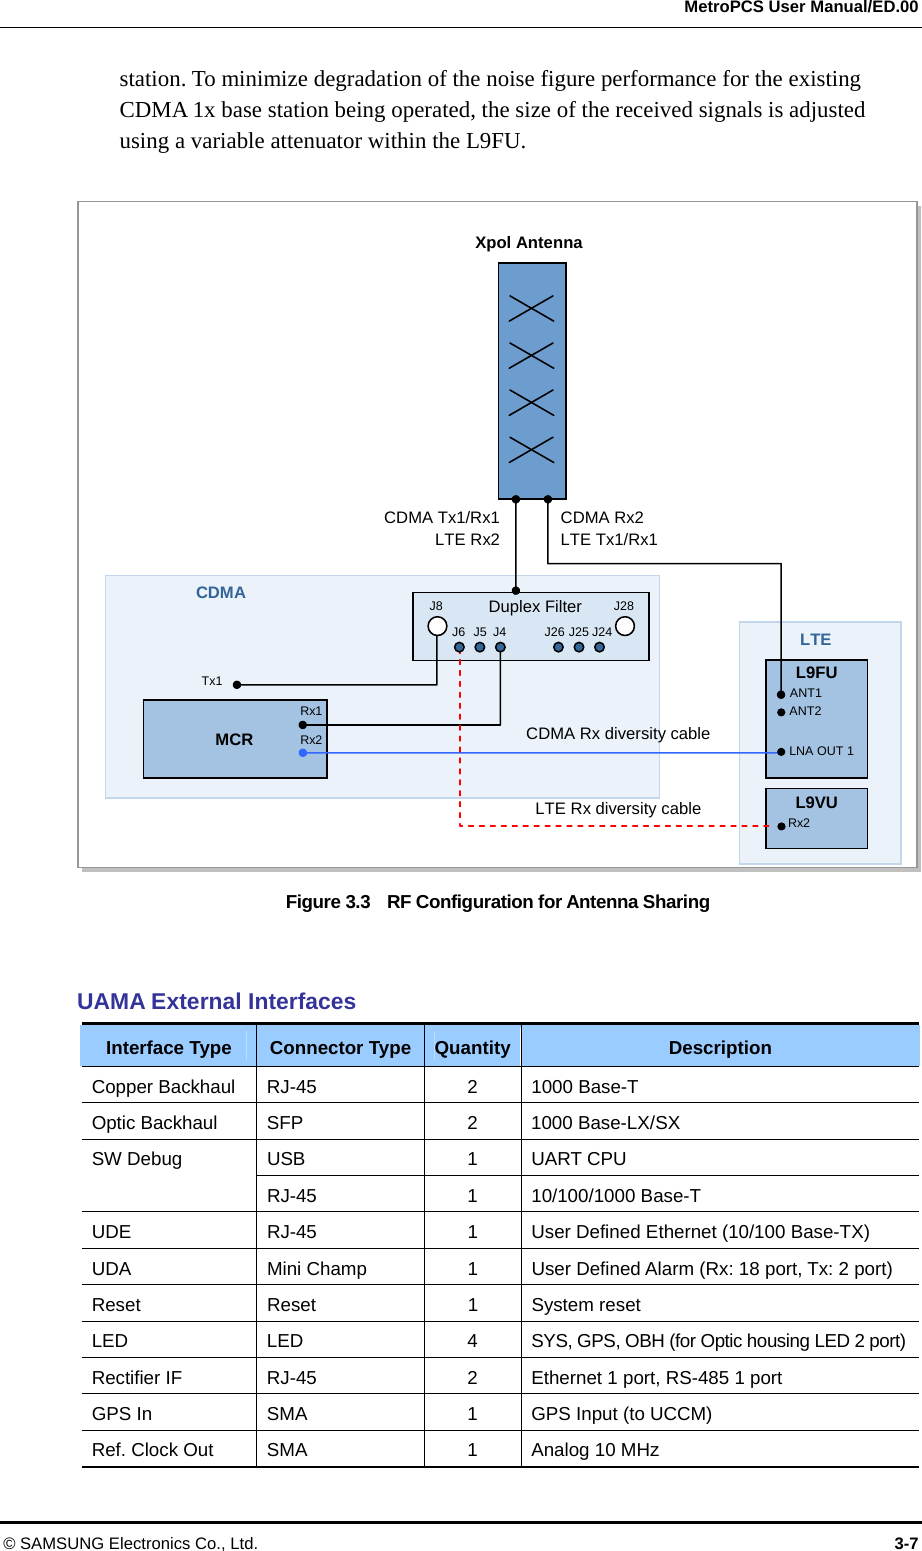  MetroPCS User Manual/ED.00 © SAMSUNG Electronics Co., Ltd.  3-7 station. To minimize degradation of the noise figure performance for the existing CDMA 1x base station being operated, the size of the received signals is adjusted using a variable attenuator within the L9FU.  Figure 3.3    RF Configuration for Antenna Sharing   UAMA External Interfaces Interface Type  Connector Type Quantity Description Copper Backhaul    RJ-45  2  1000 Base-T Optic Backhaul  SFP  2  1000 Base-LX/SX USB 1 UART CPU SW Debug RJ-45 1 10/100/1000 Base-T UDE  RJ-45  1  User Defined Ethernet (10/100 Base-TX) UDA  Mini Champ  1  User Defined Alarm (Rx: 18 port, Tx: 2 port) Reset Reset  1 System reset LED  LED  4  SYS, GPS, OBH (for Optic housing LED 2 port)Rectifier IF  RJ-45  2  Ethernet 1 port, RS-485 1 port GPS In  SMA  1  GPS Input (to UCCM) Ref. Clock Out  SMA  1  Analog 10 MHz CDMA LTE    MCR Xpol Antenna LTE Rx diversity cable CDMA Rx diversity cable CDMA Rx2 LTE Tx1/Rx1 CDMA Tx1/Rx1LTE Rx2Duplex Filter J8 J28 J6 J5 J4  J26 J25 J24 Rx1 Rx2 ANT1 ANT2 LNA OUT 1L9VU L9FU Rx2 Tx1 